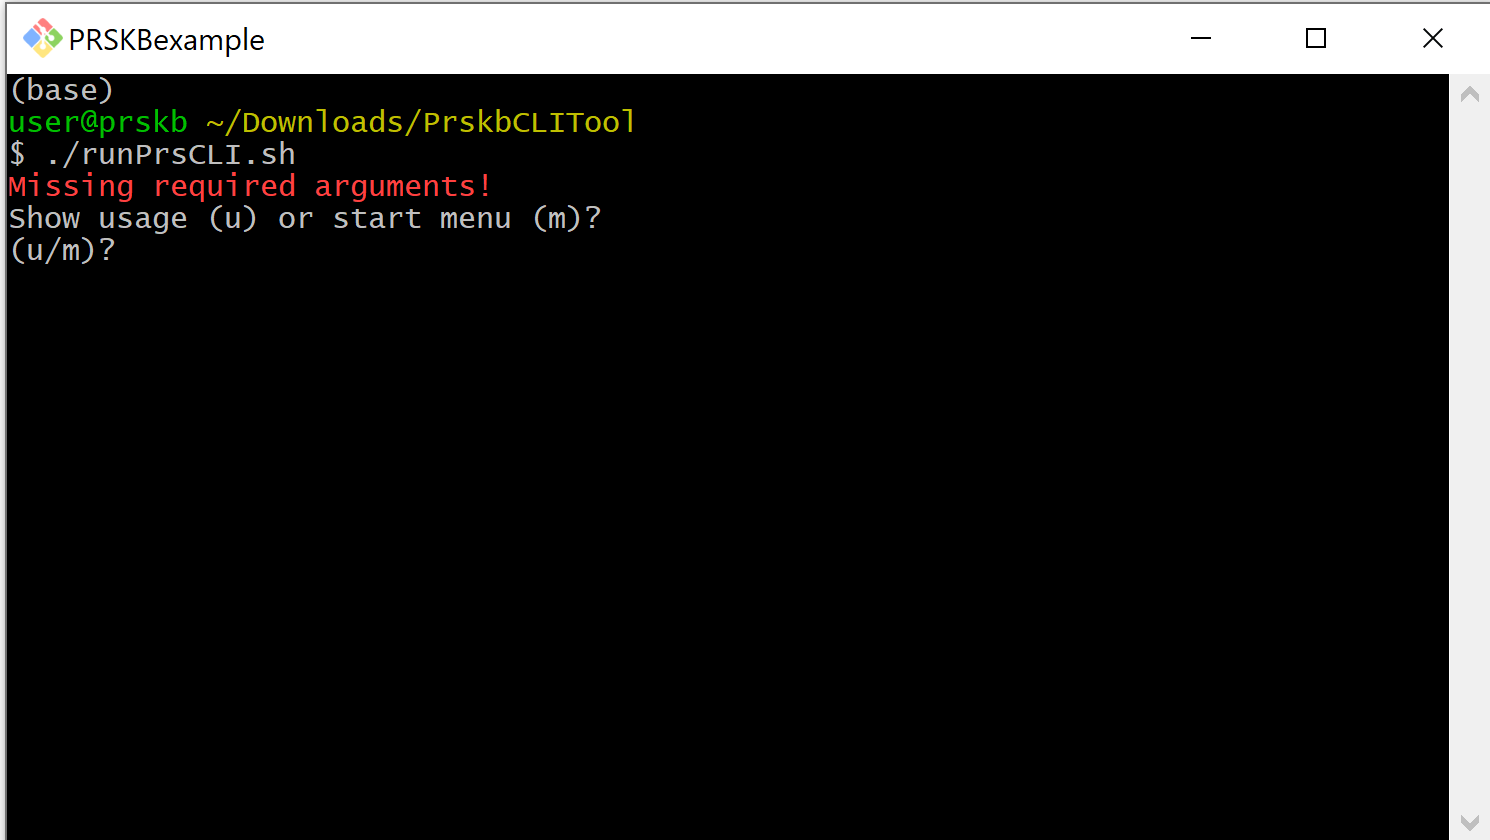 CLI tool run without parameters